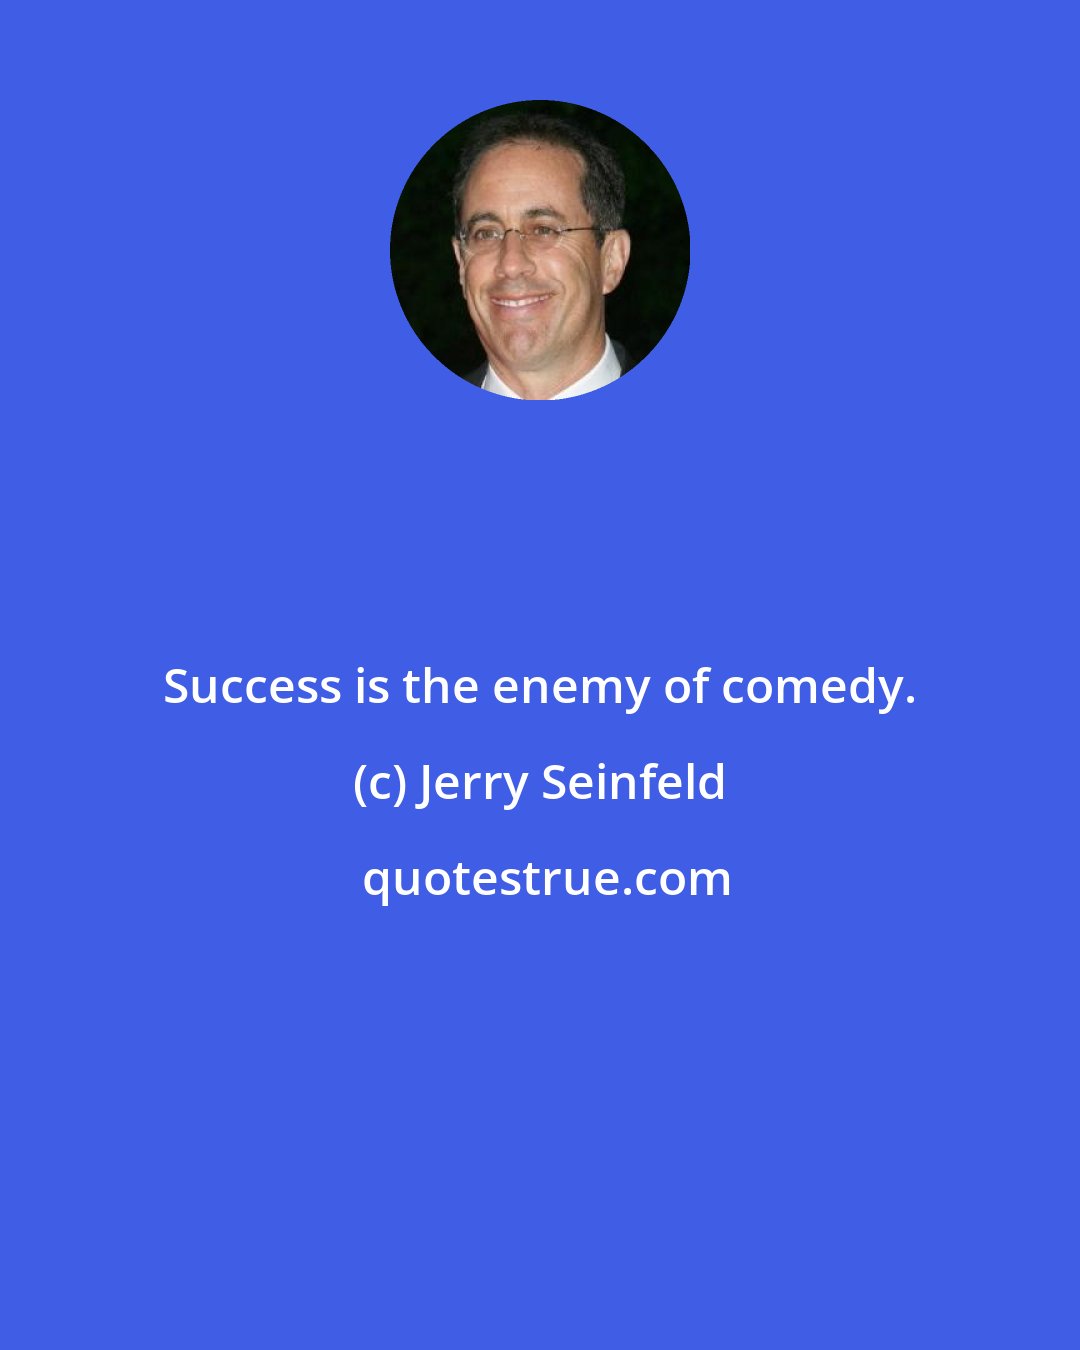 Jerry Seinfeld: Success is the enemy of comedy.